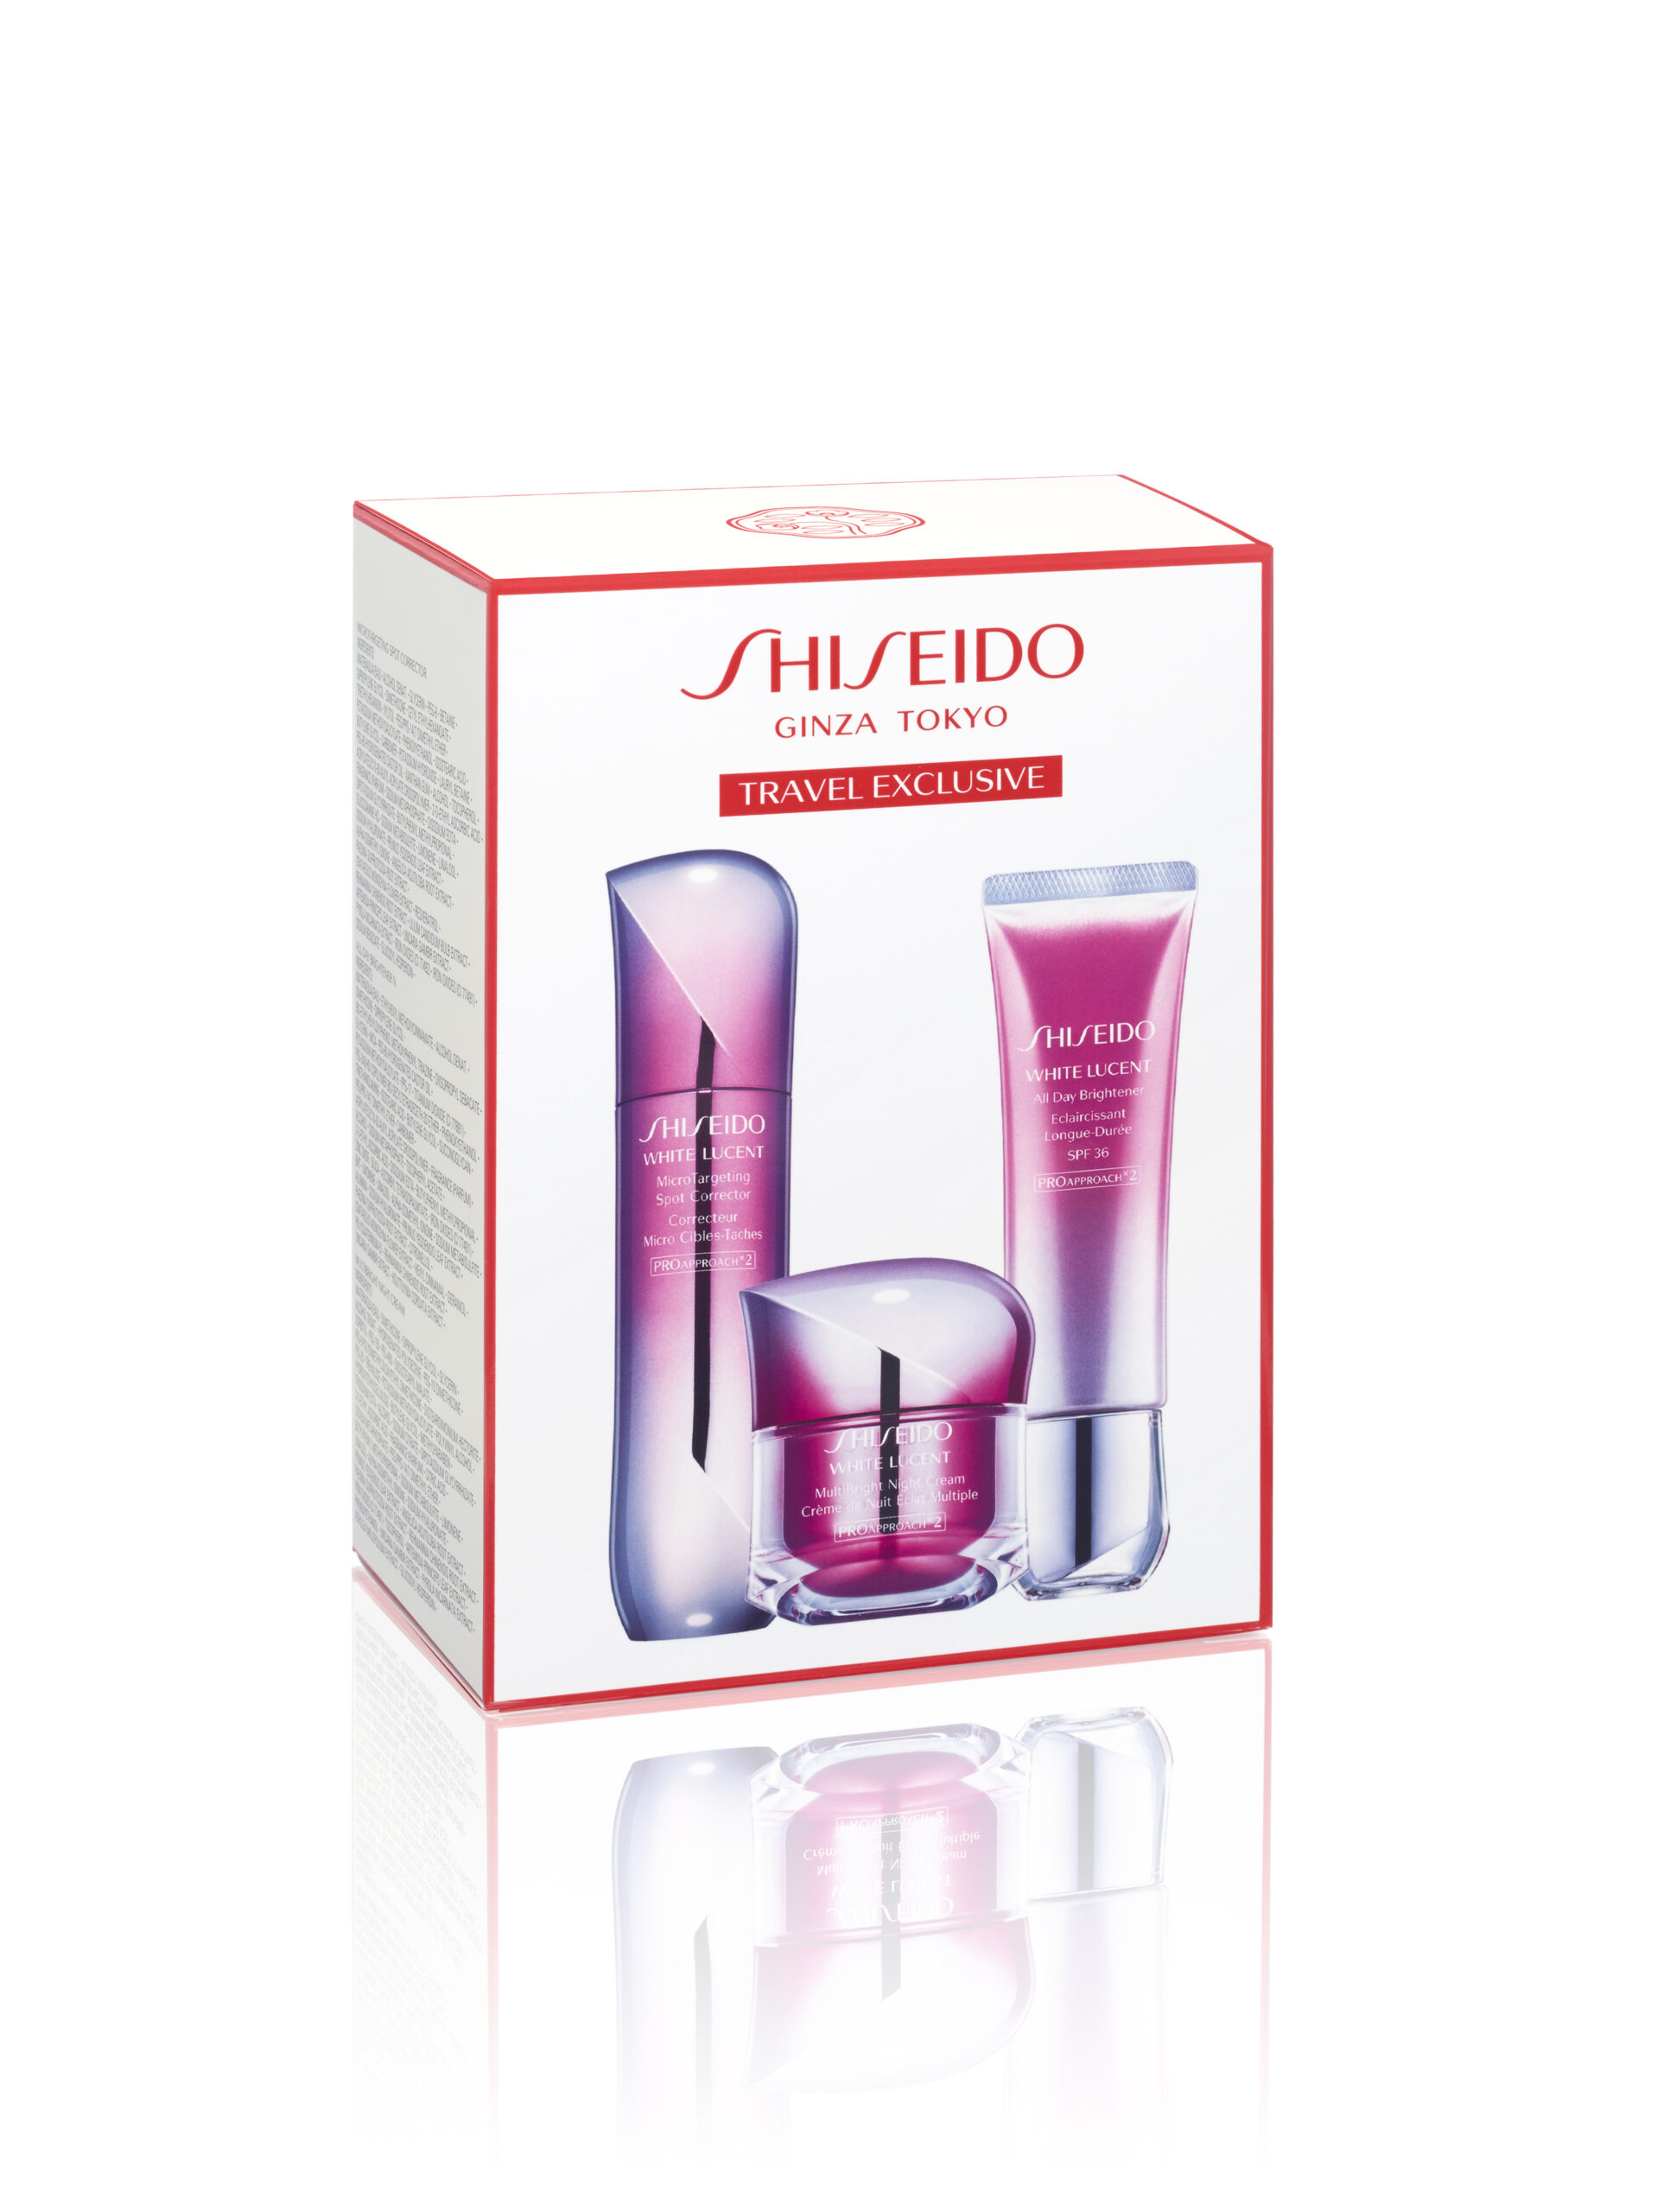 As a 'pioneering research authority in skin-brightening', Shiseido will be extending the White Lucent skincare line